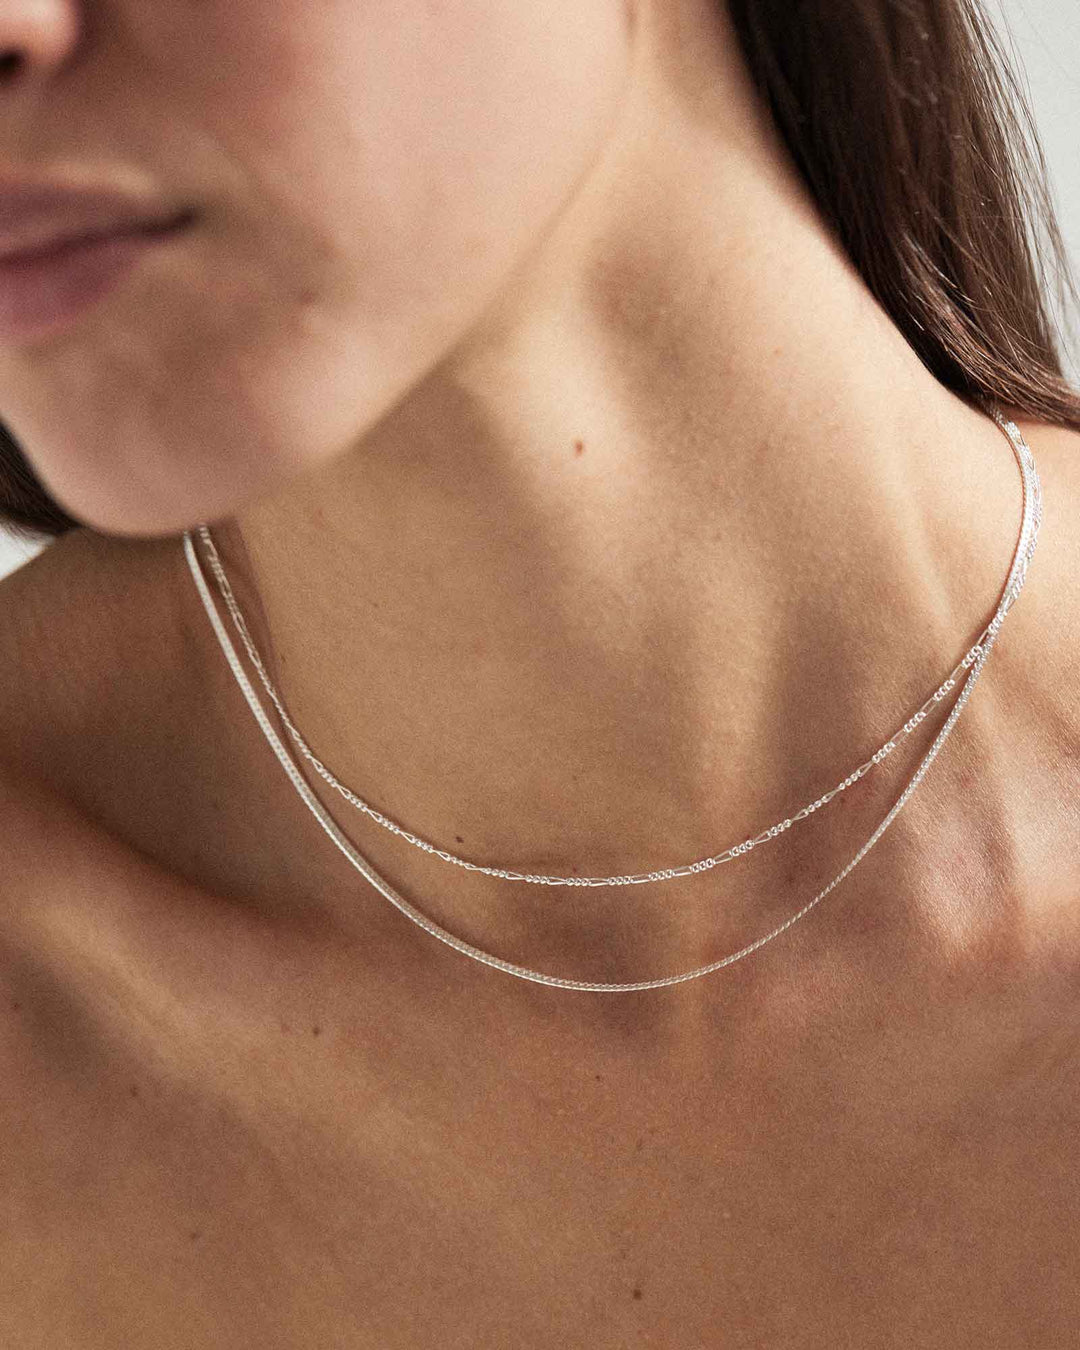 Kirstin Ash Echo Chain Necklace (Sterling Silver)